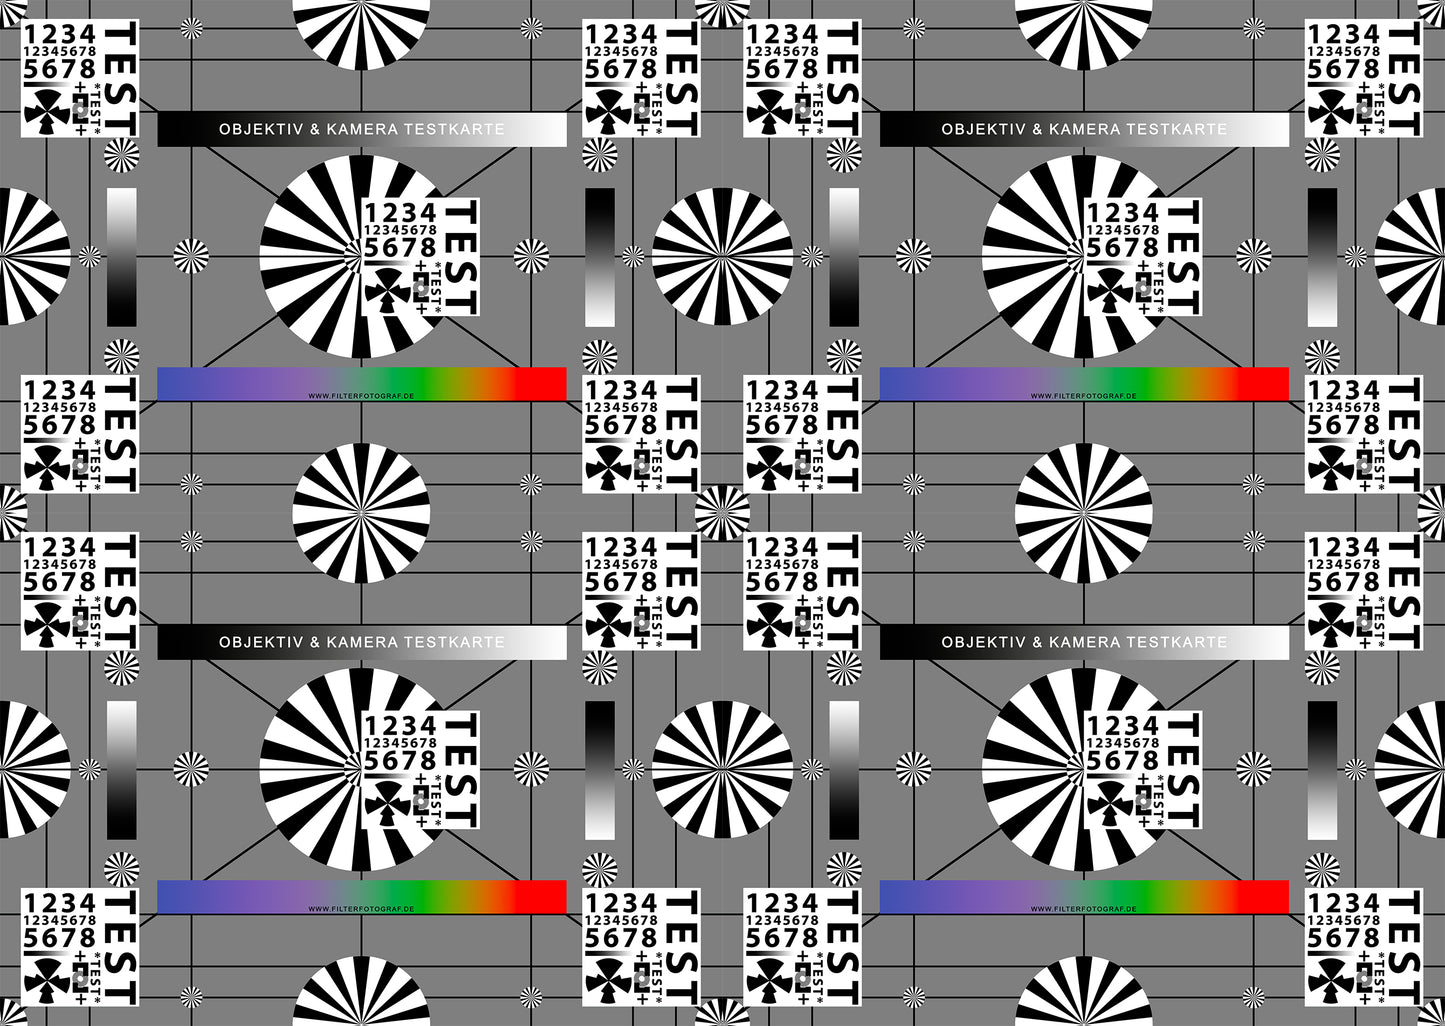 Test card for lenses and cameras - test card for lens quality from Filterfotograf